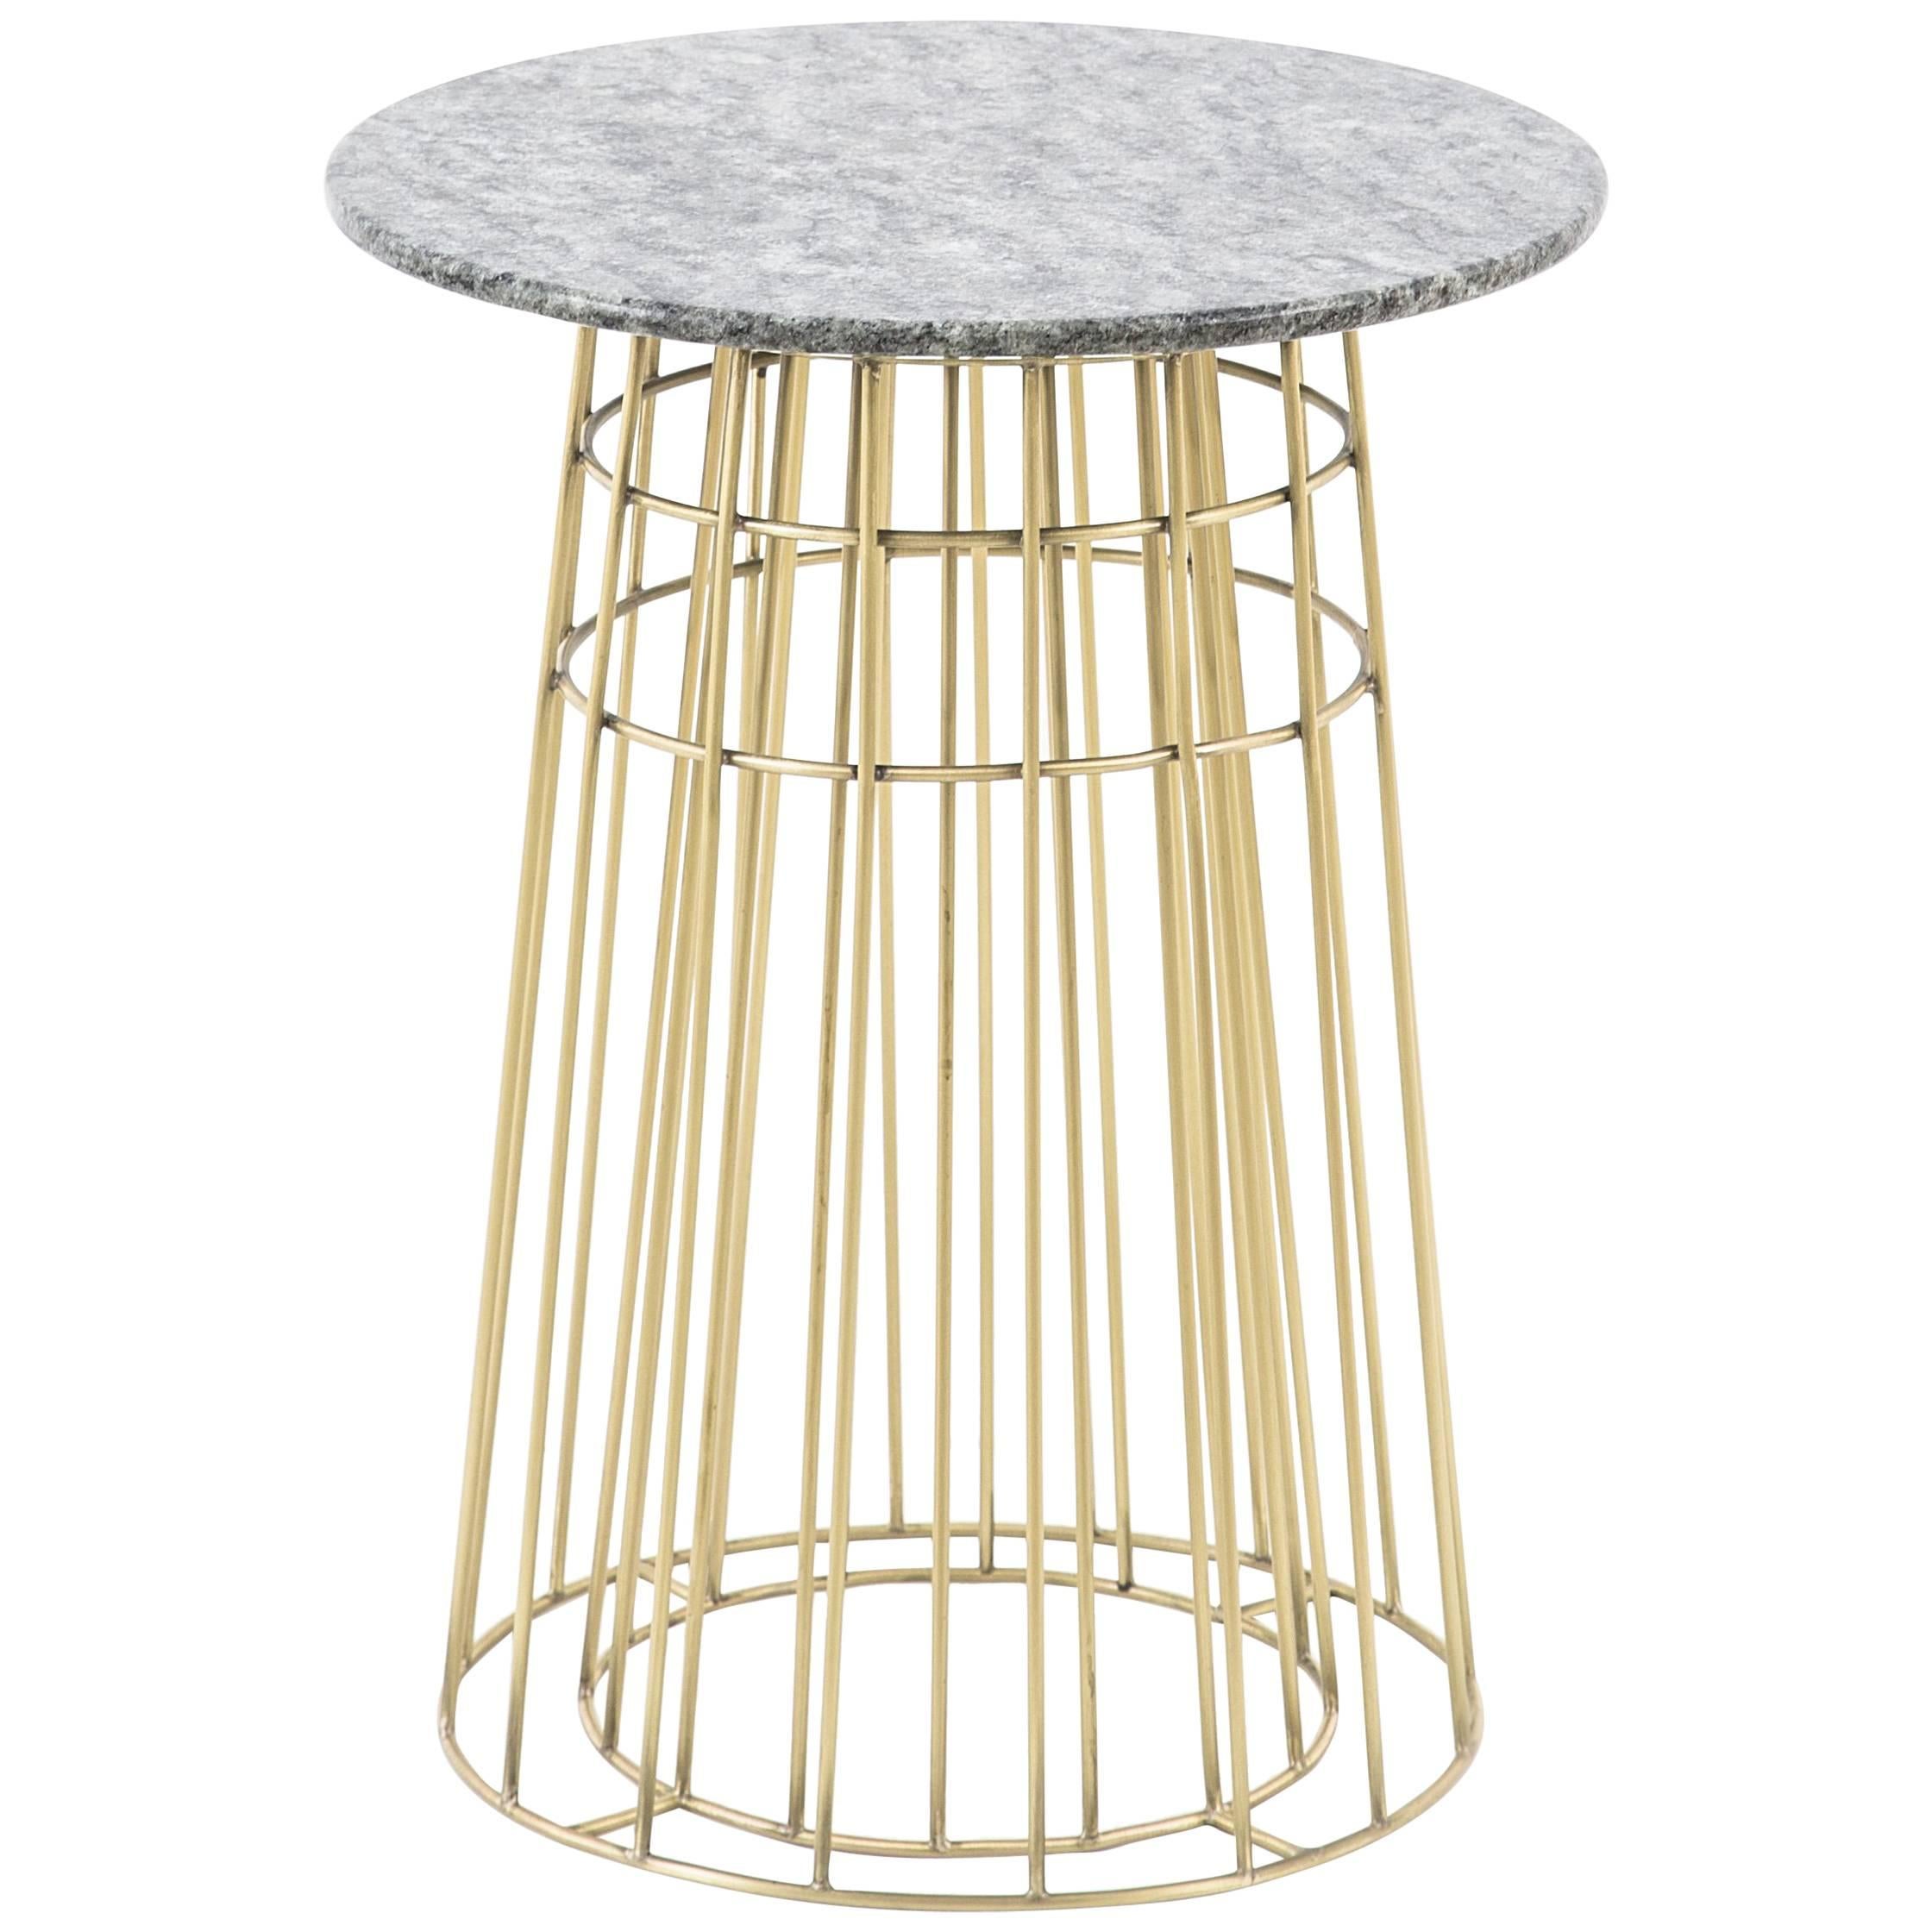 Rami sculptural Granite and Brass Side Table For Sale